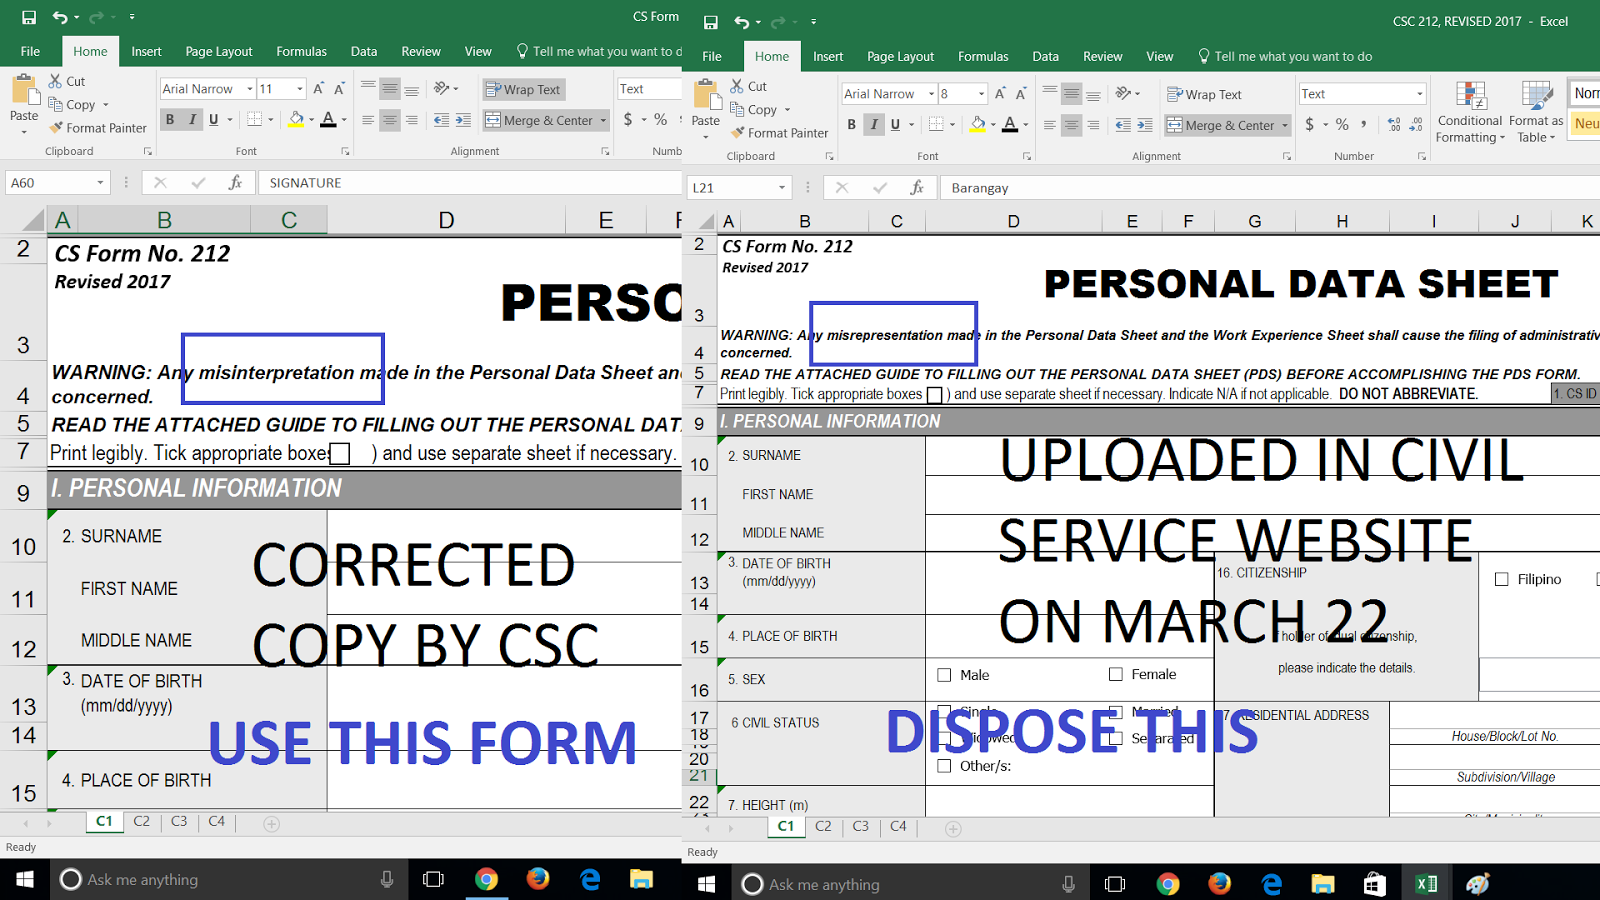 CORRECTED COPY of 2017 Personal Data Sheet (PDS) - (CSC Form 212 Revised 2017)